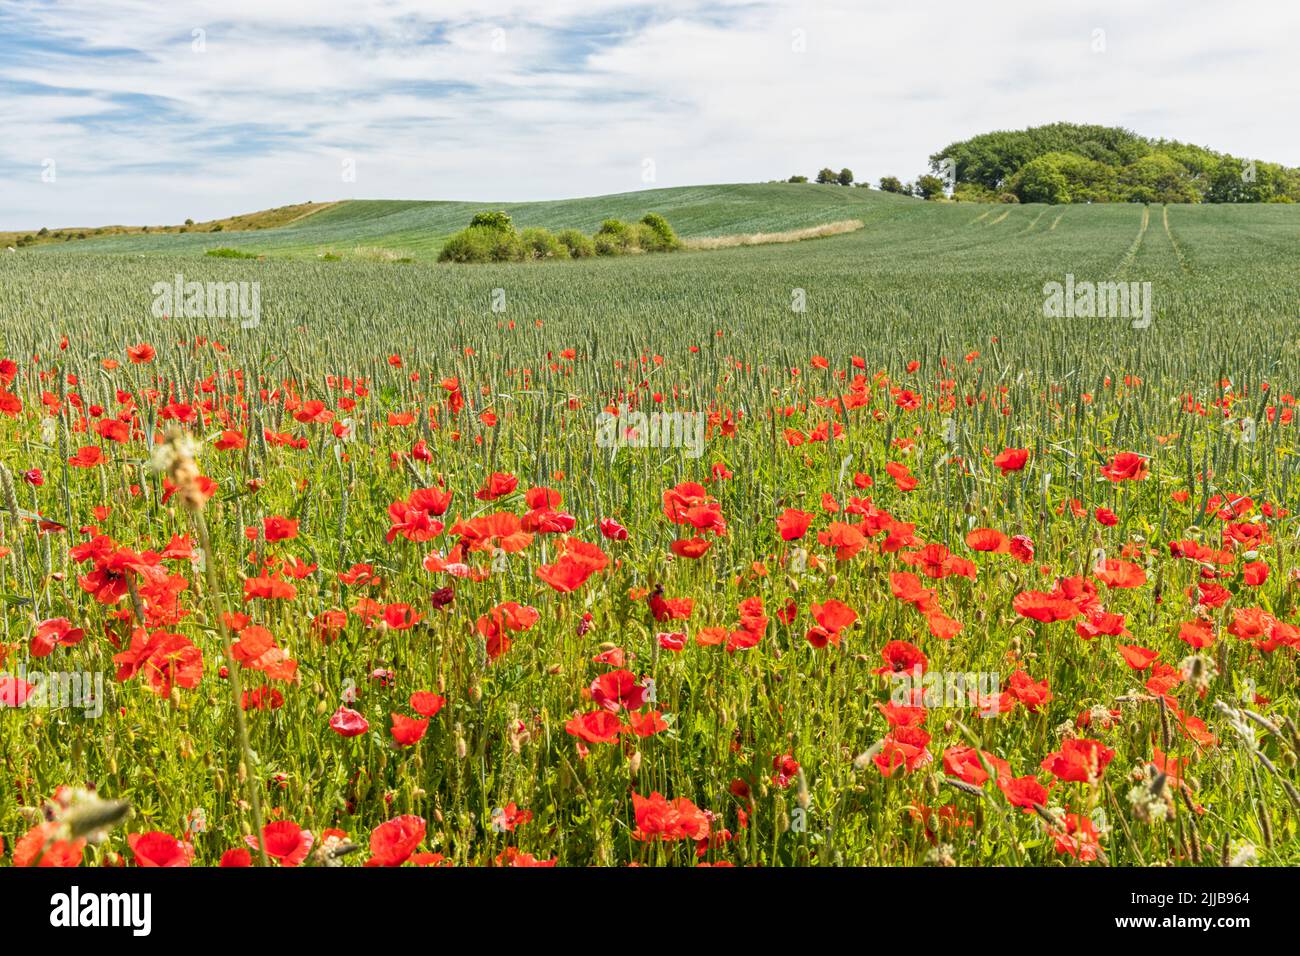 Vibrant red poppy flowers at the edge of a wheat field on baltic Sea island Langeland, Denmark Stock Photo